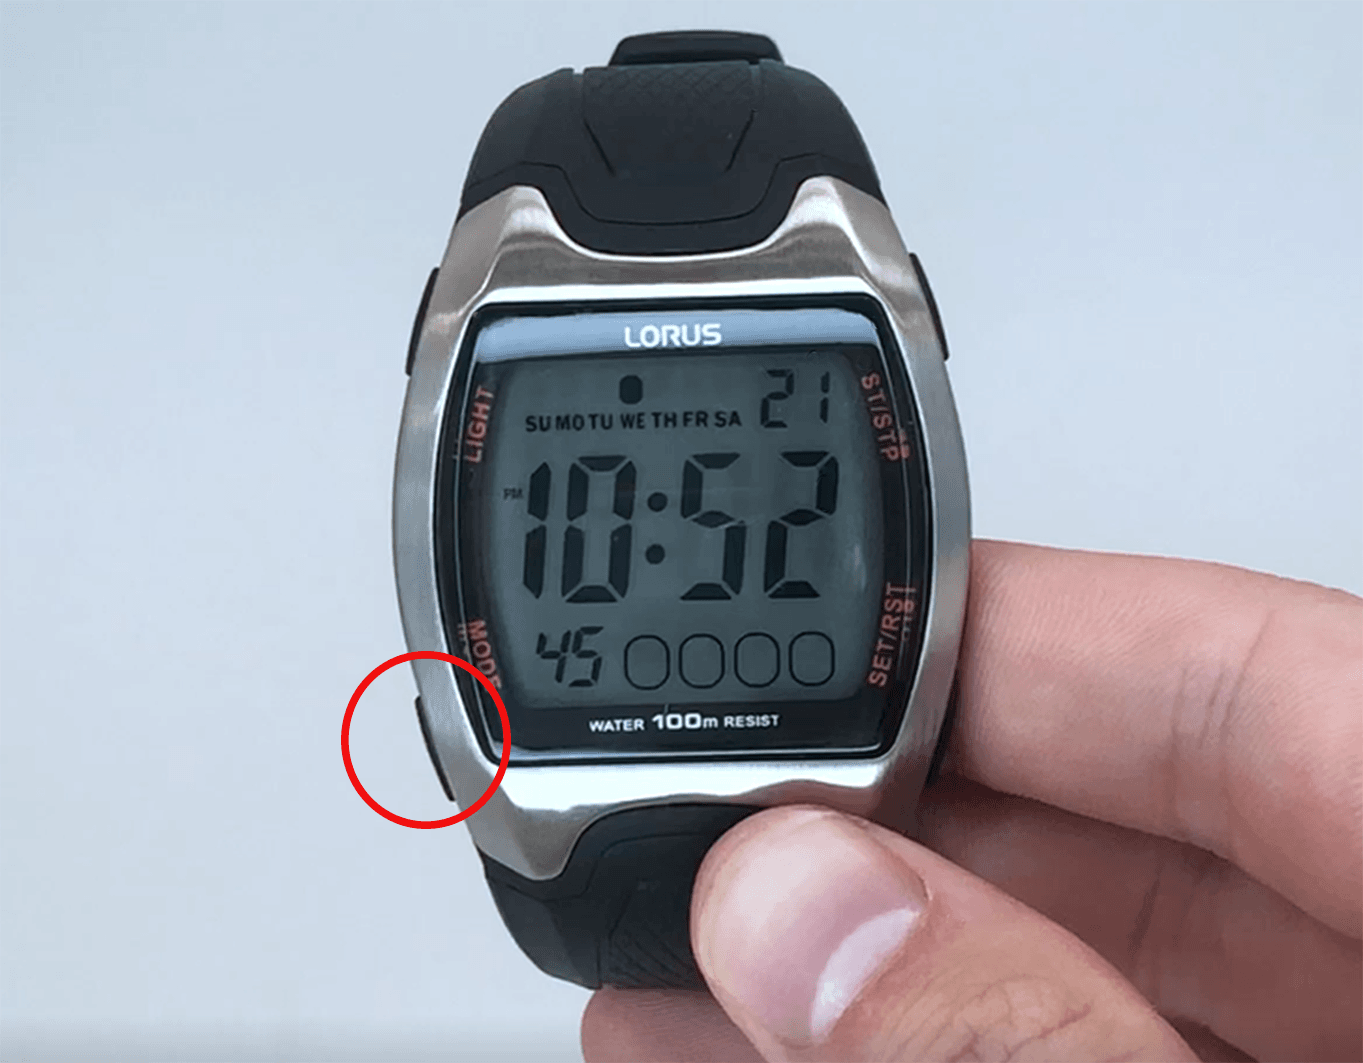 How To Change The Time On A Lorus Digital Watch